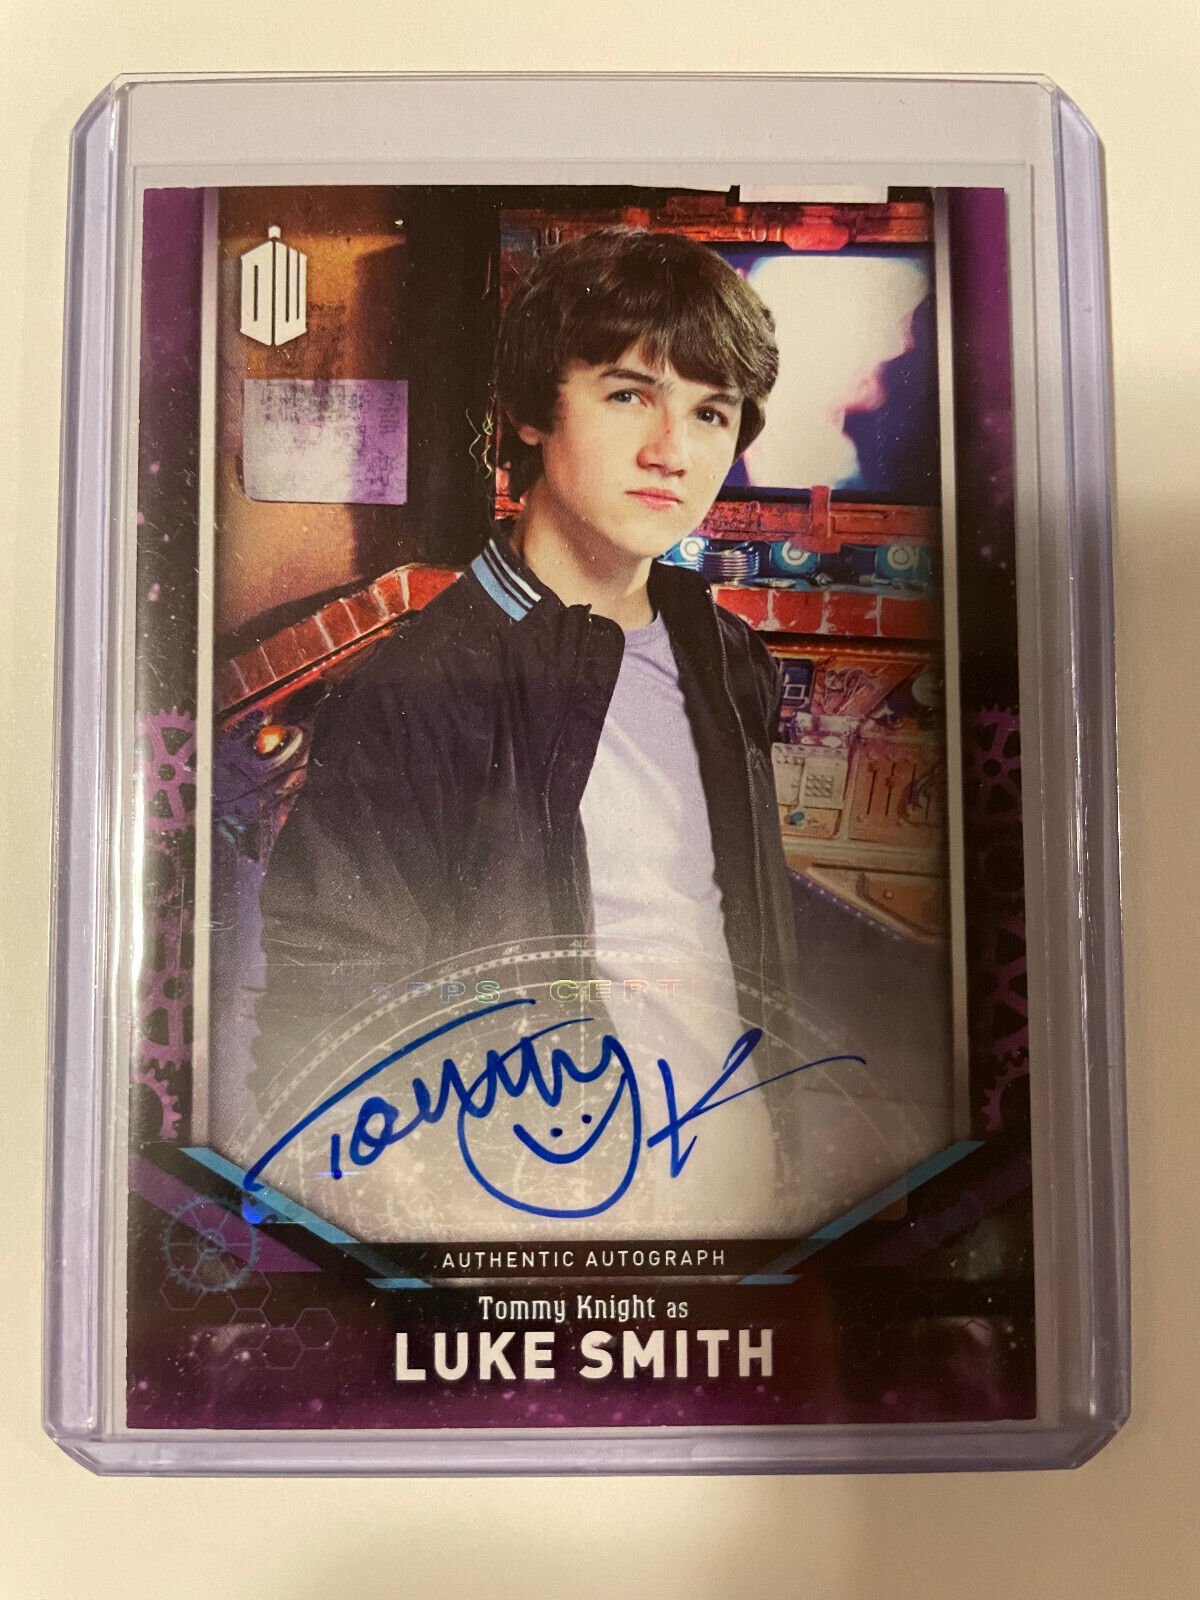 2018 Topps Doctor Who Signature Series Tommy Knight as Luke Smith autograph